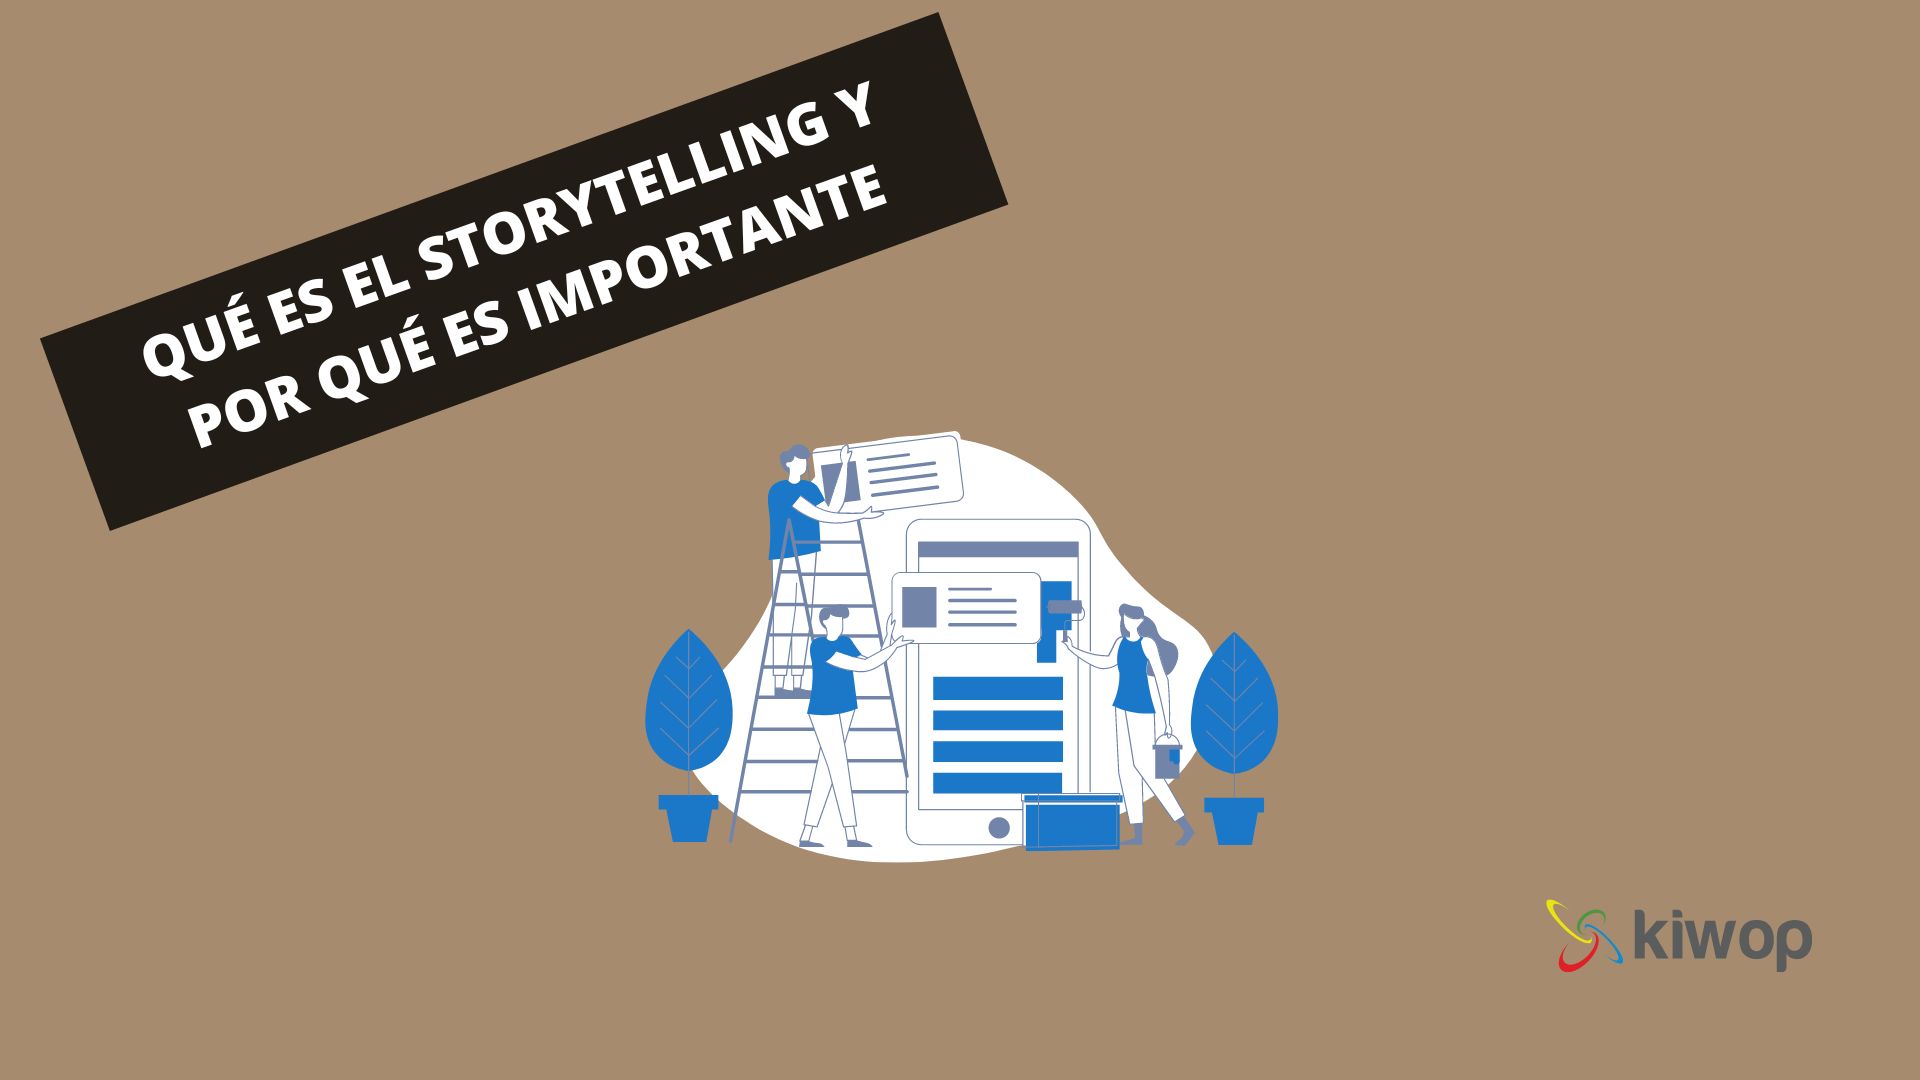 What is storytelling and why is it important?